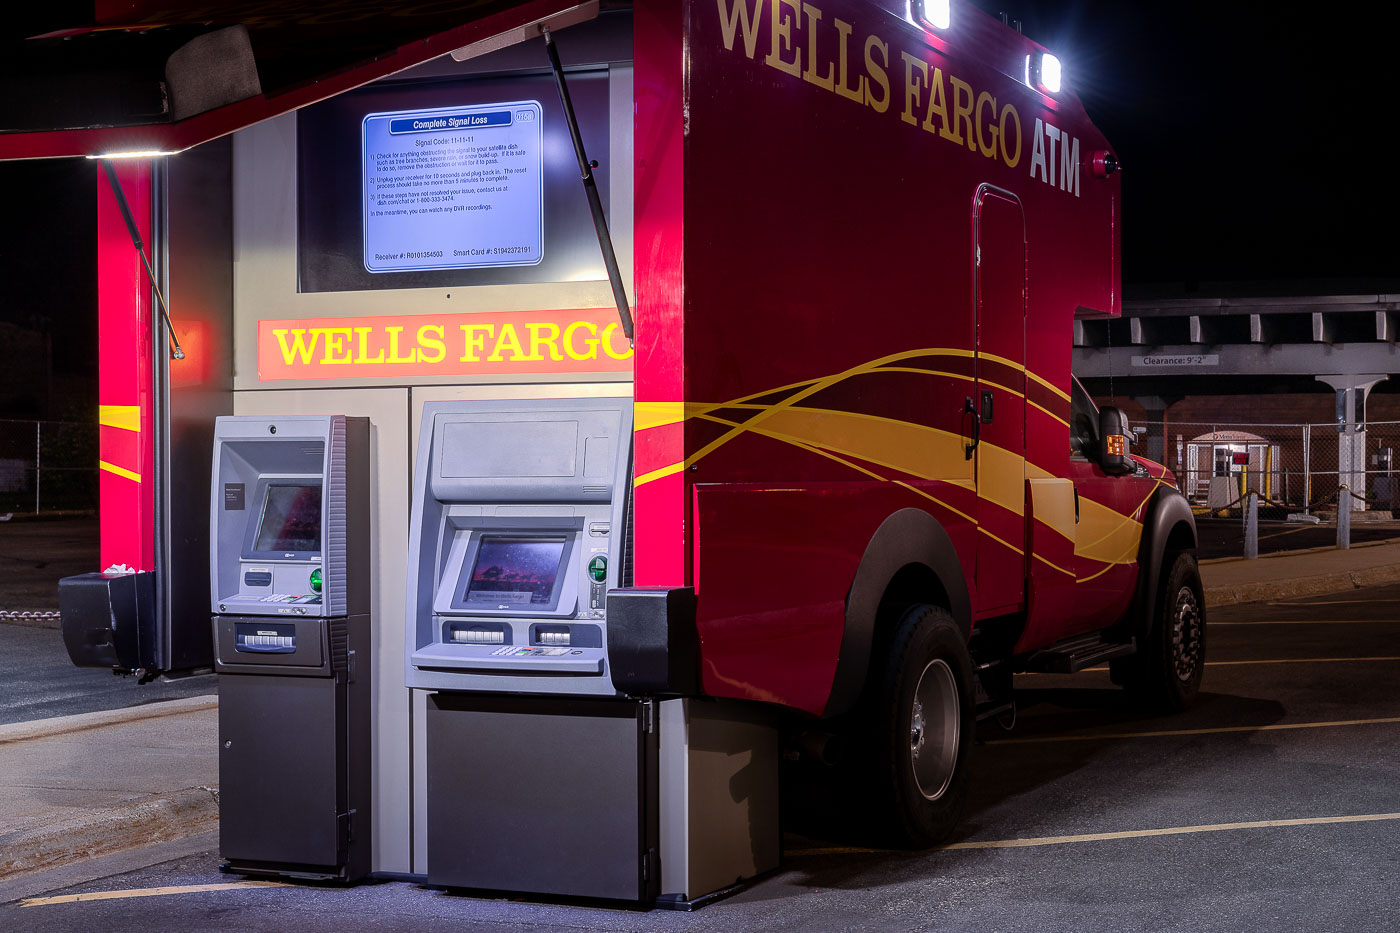 A mobile ATM setup in a bank parking lot